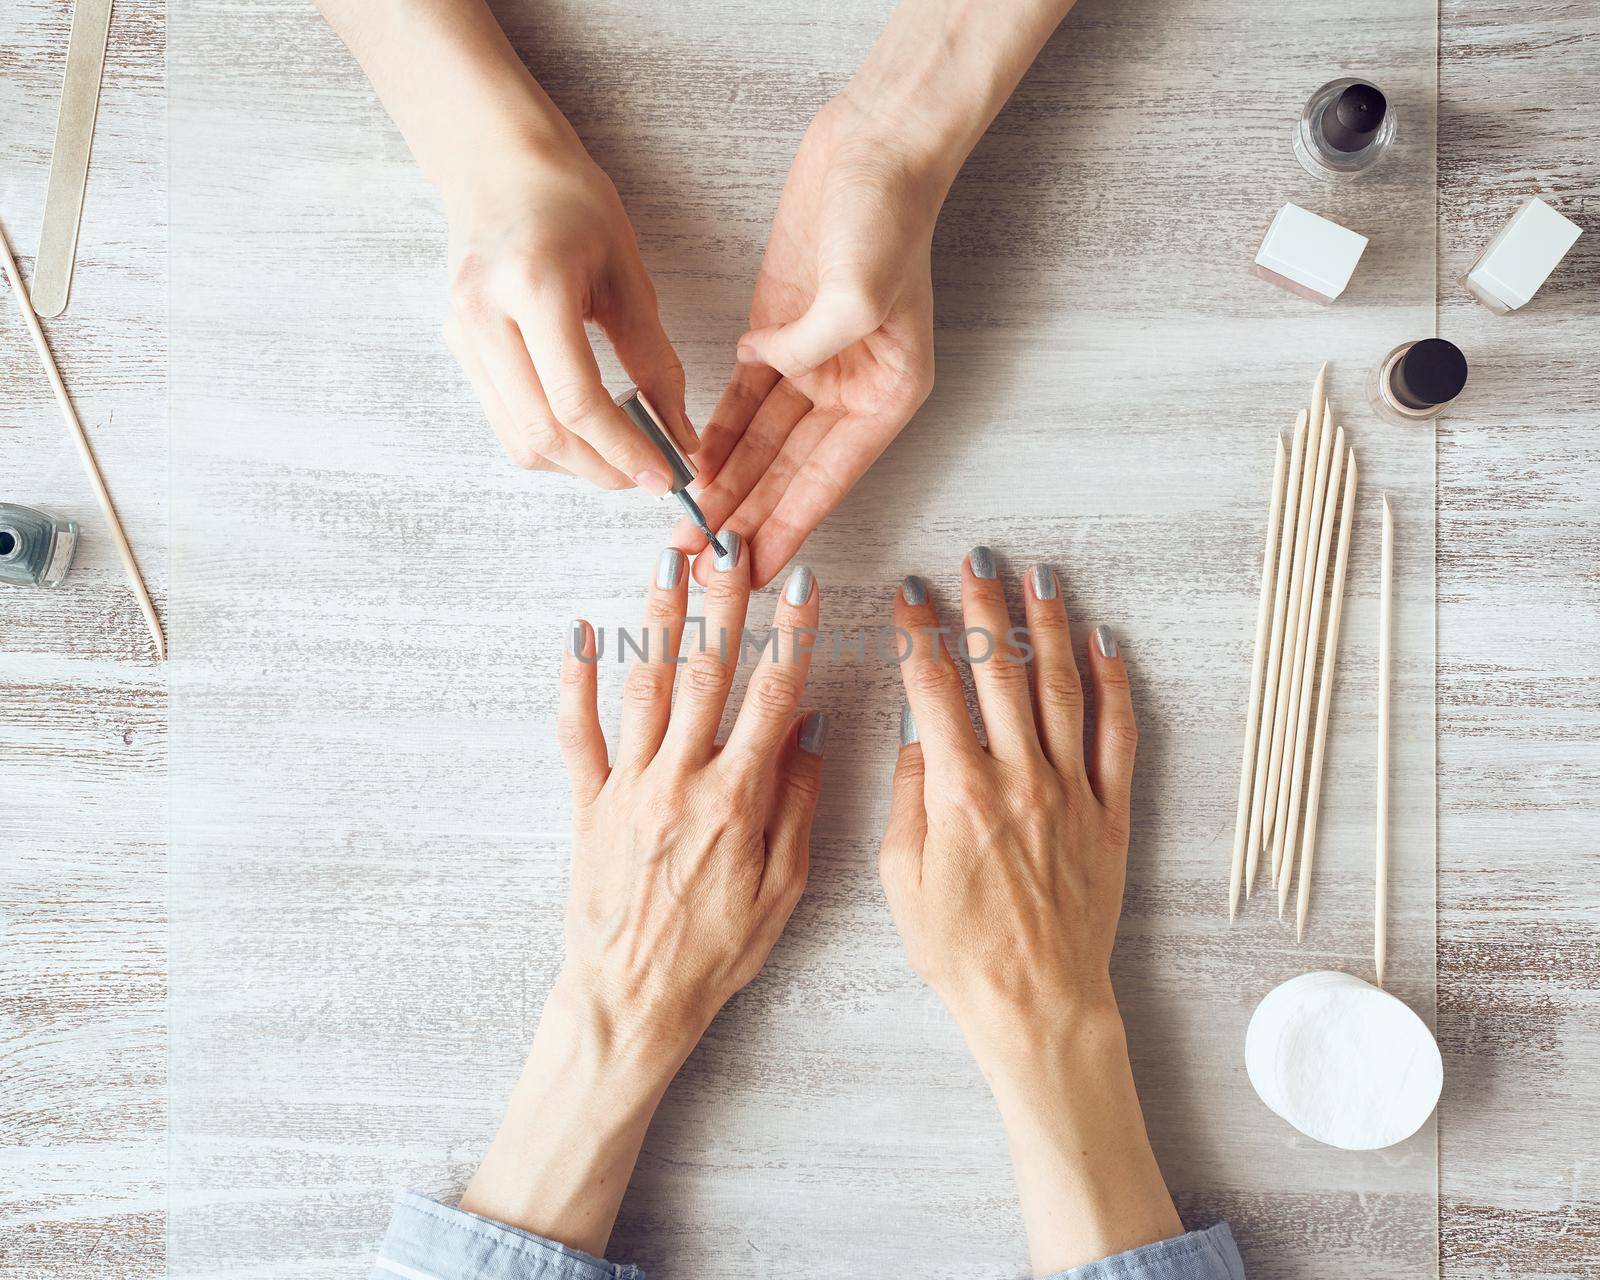 Mother and daughter do manicure, paint nails with varnish. Home care during quarantine, self-isolation. Top view of hands on table.